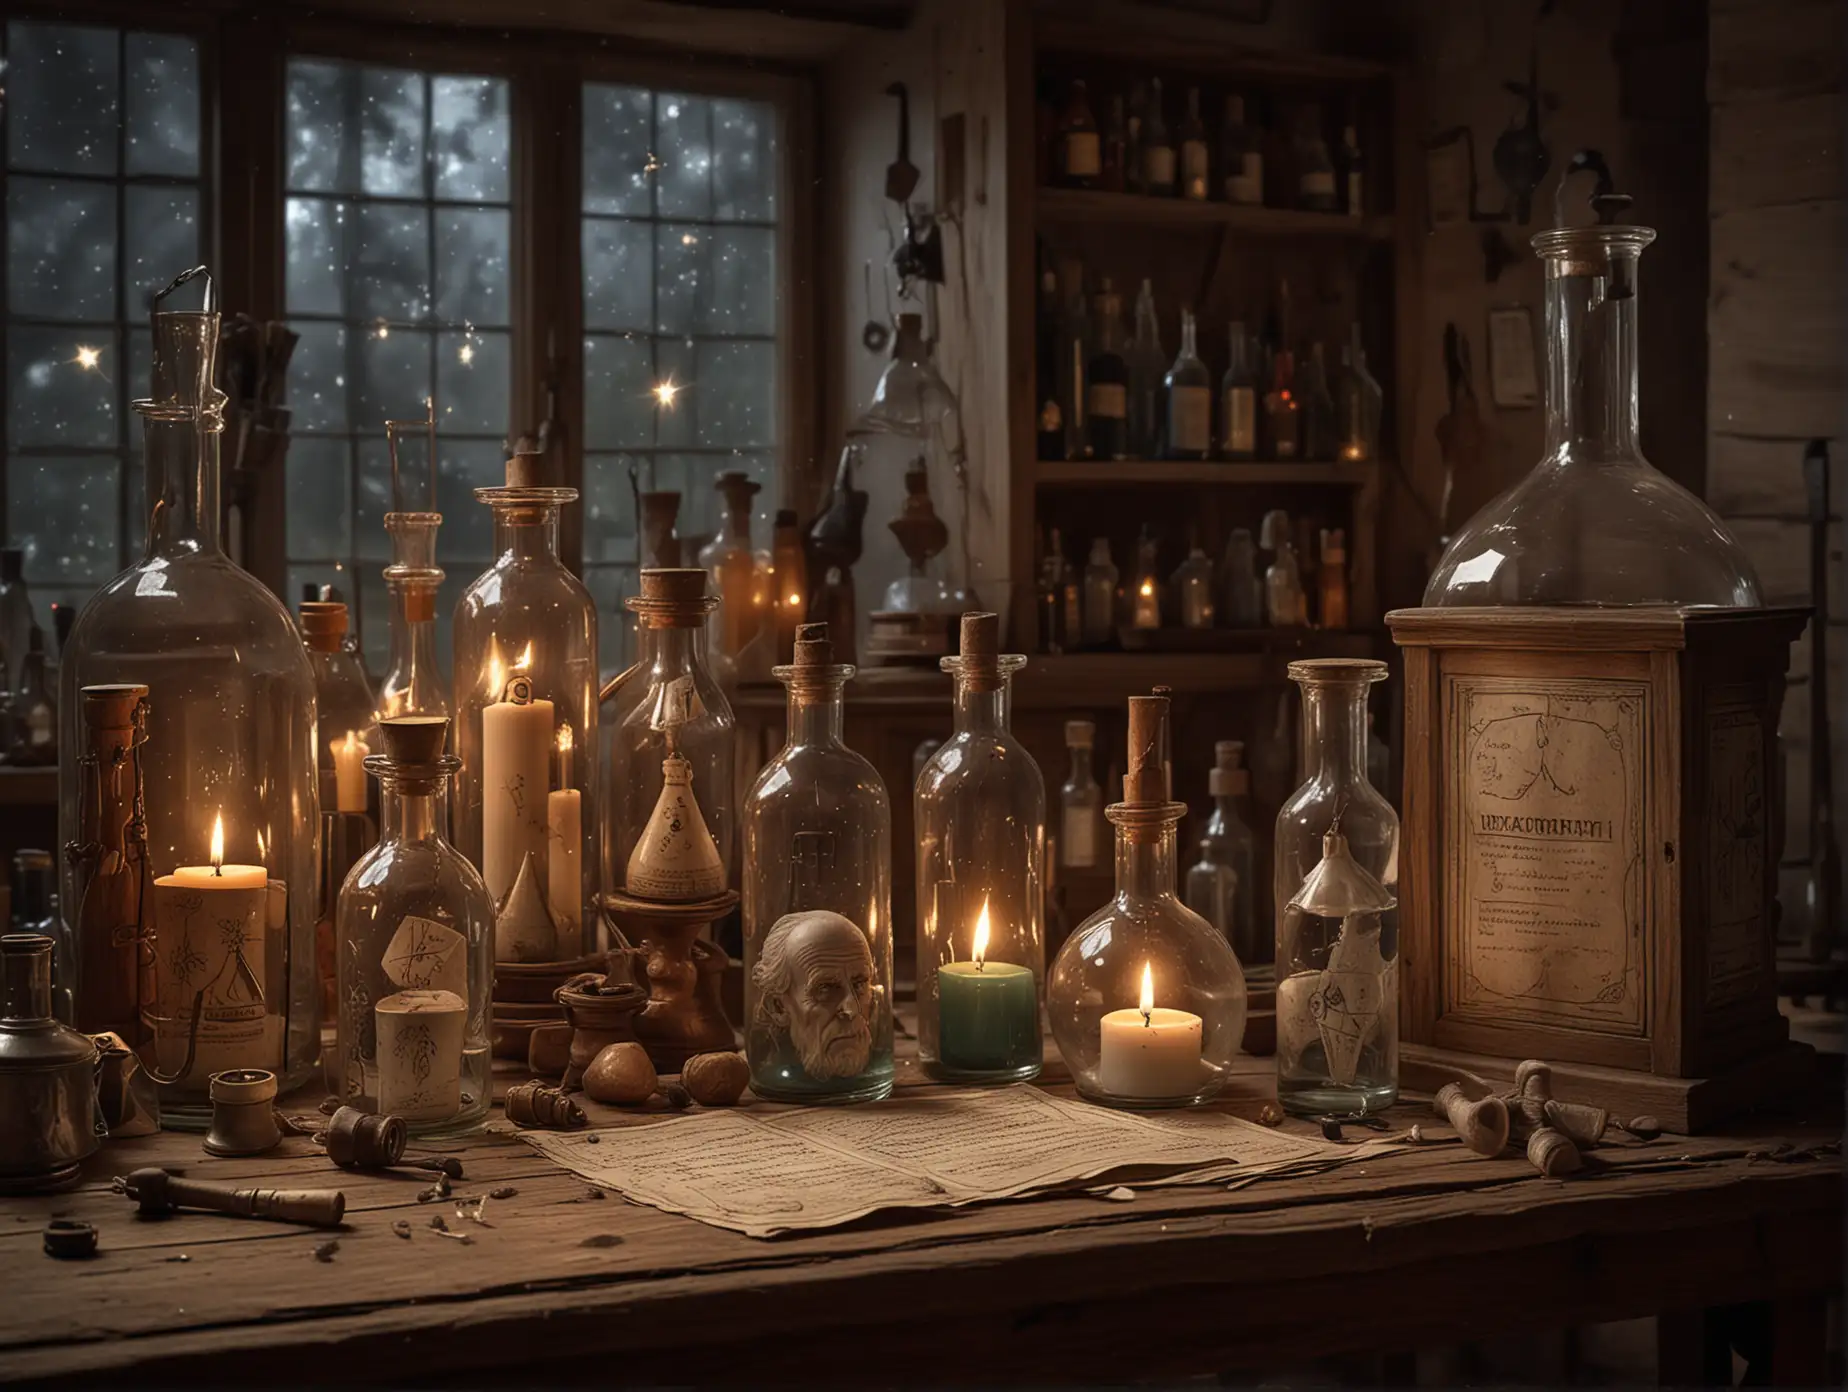 Alchemical-Laboratory-Scene-with-Sleeping-Old-Man-and-Astrological-Bottles